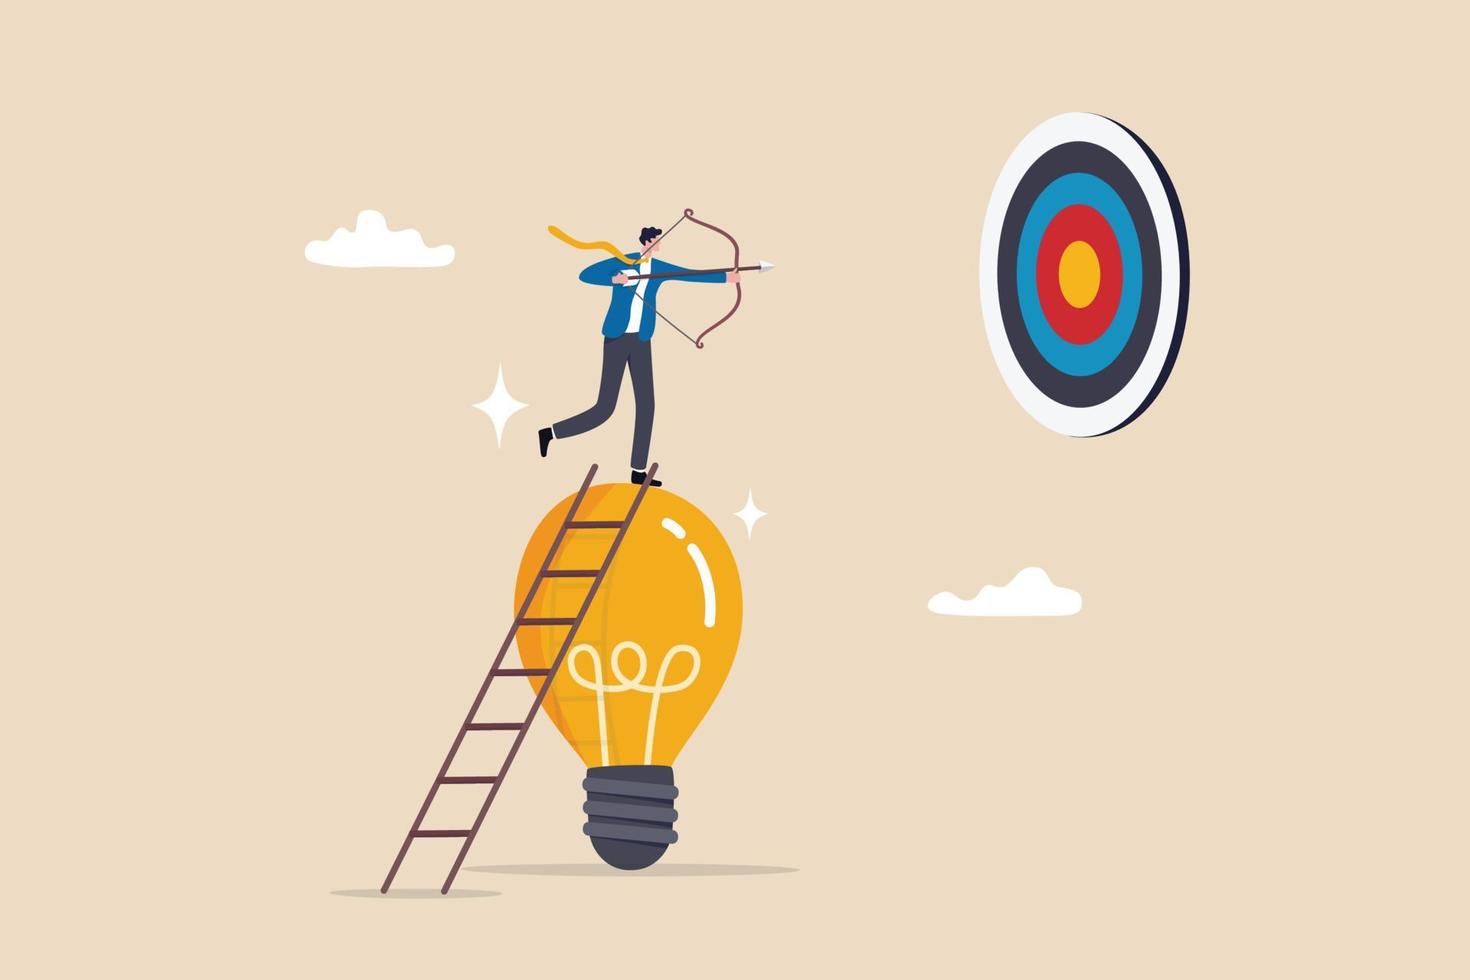 Idea to achieve target, strategy or planning to achieve goal, innovation to insight to reach target, solution or creativity concept, businessman climb up ladder on lightbulb idea to shoot at target vector